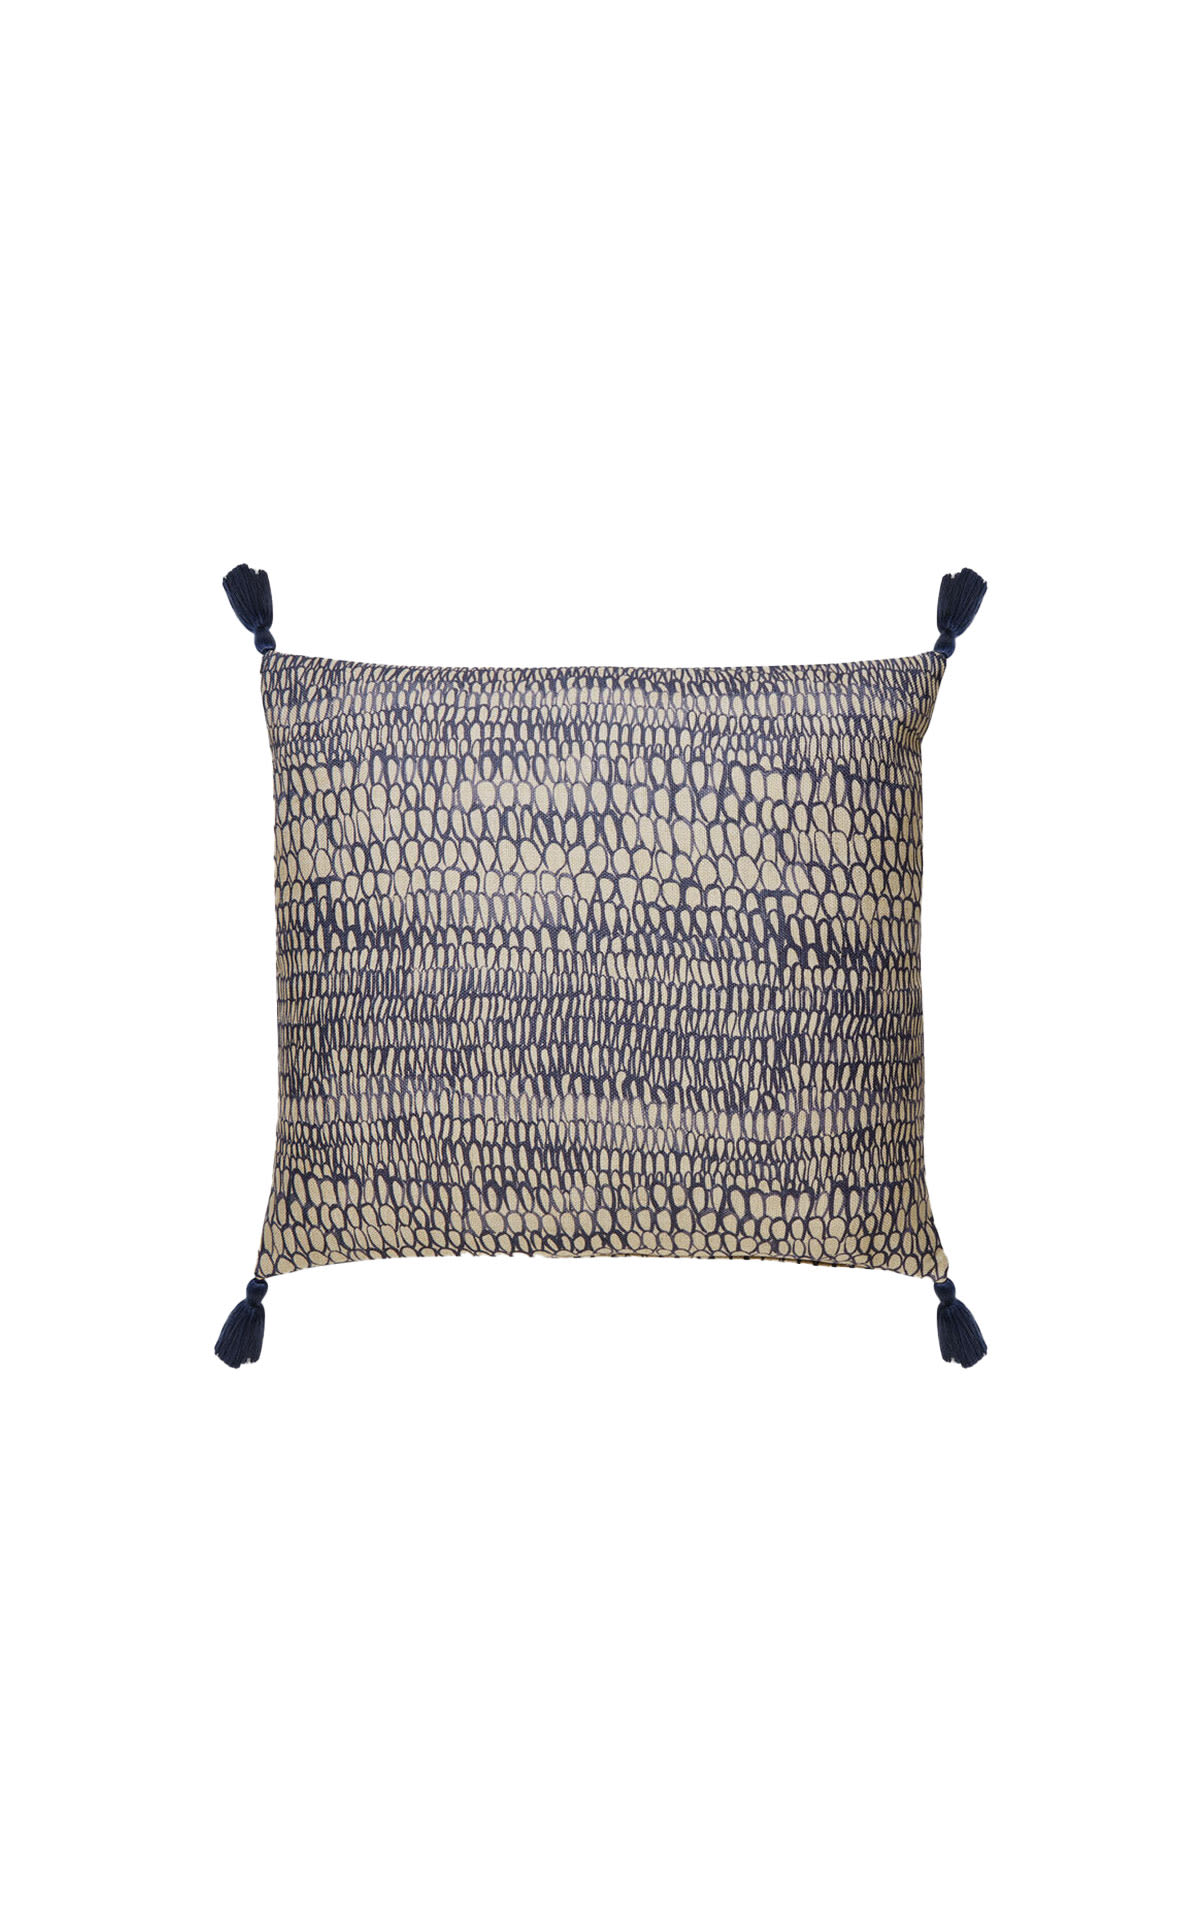 Soho Home Morar square cushion  from Bicester Village